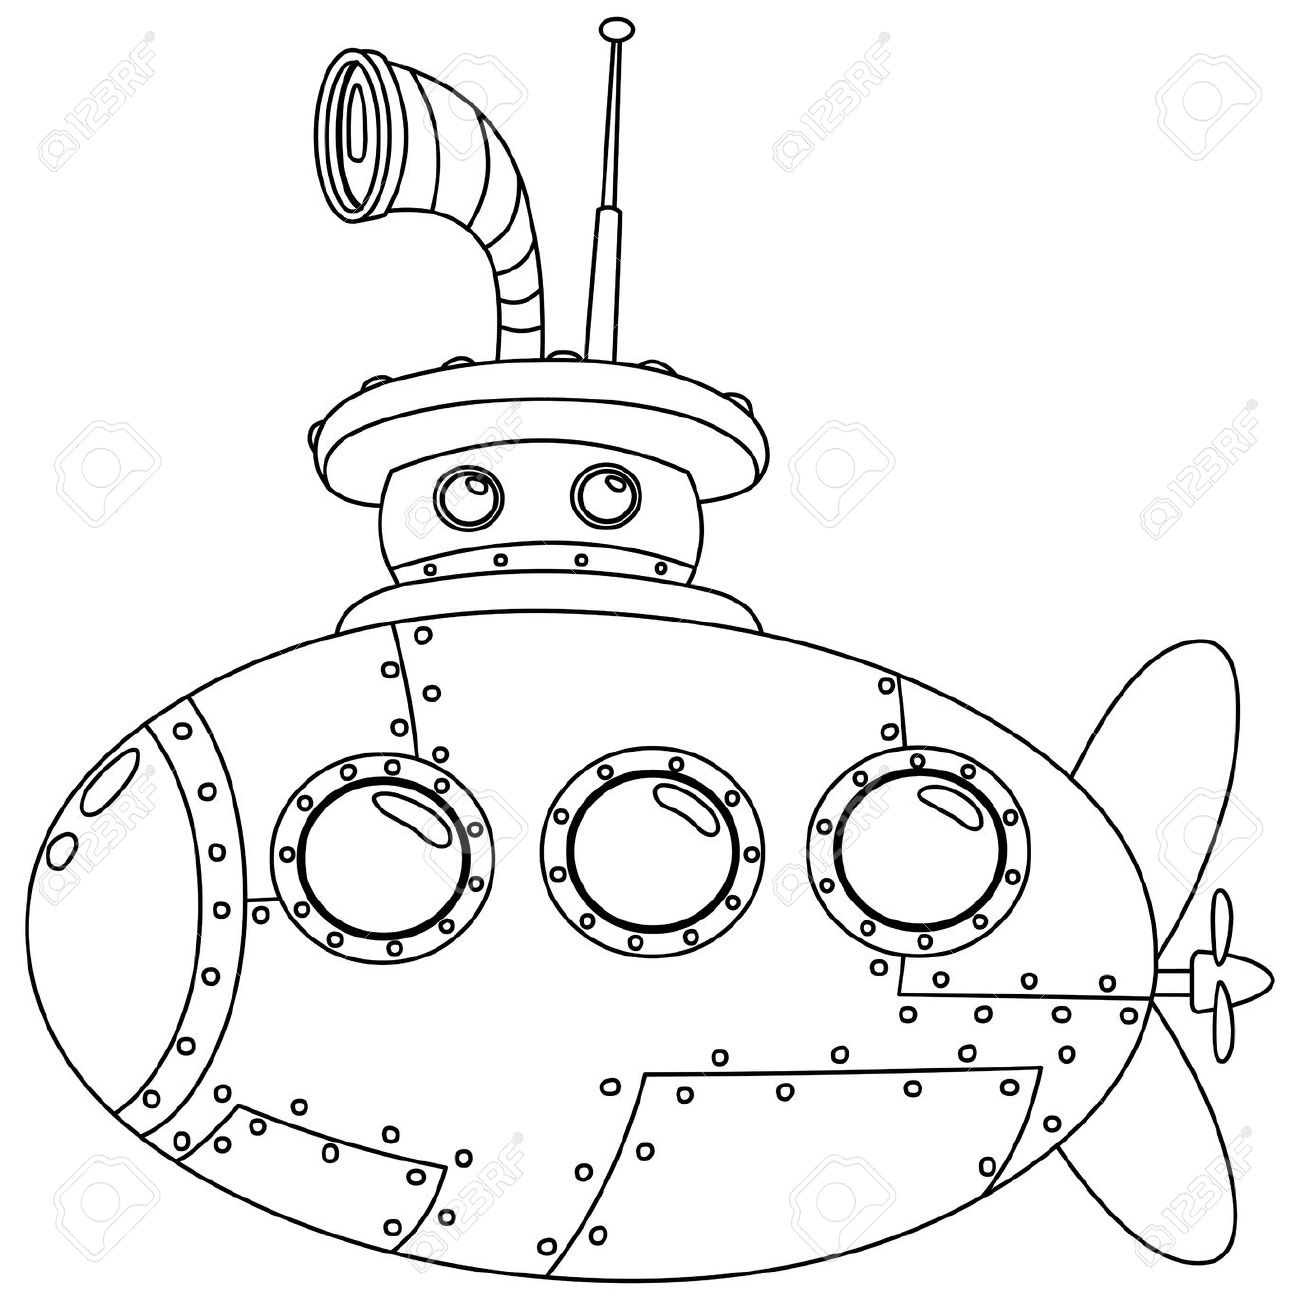 Free Nautical coloring pages to print for kids Download print and color